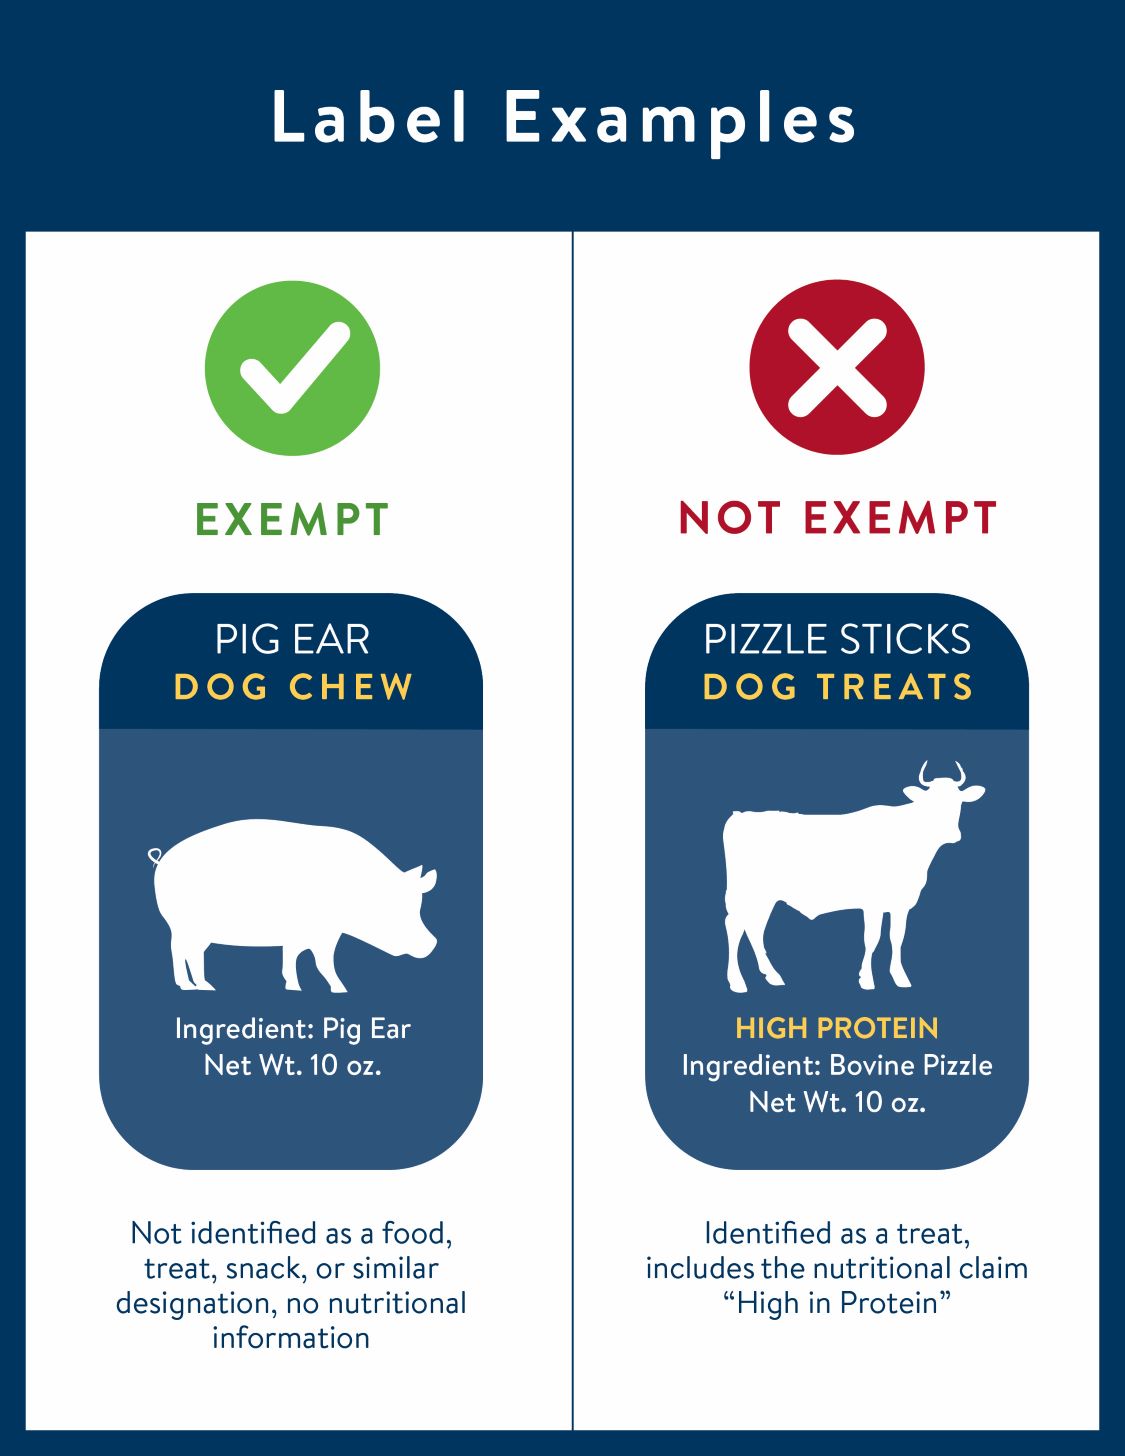 Infographic showing examples of exempt and NOT exempt pet/specialty pet labels, as explained below